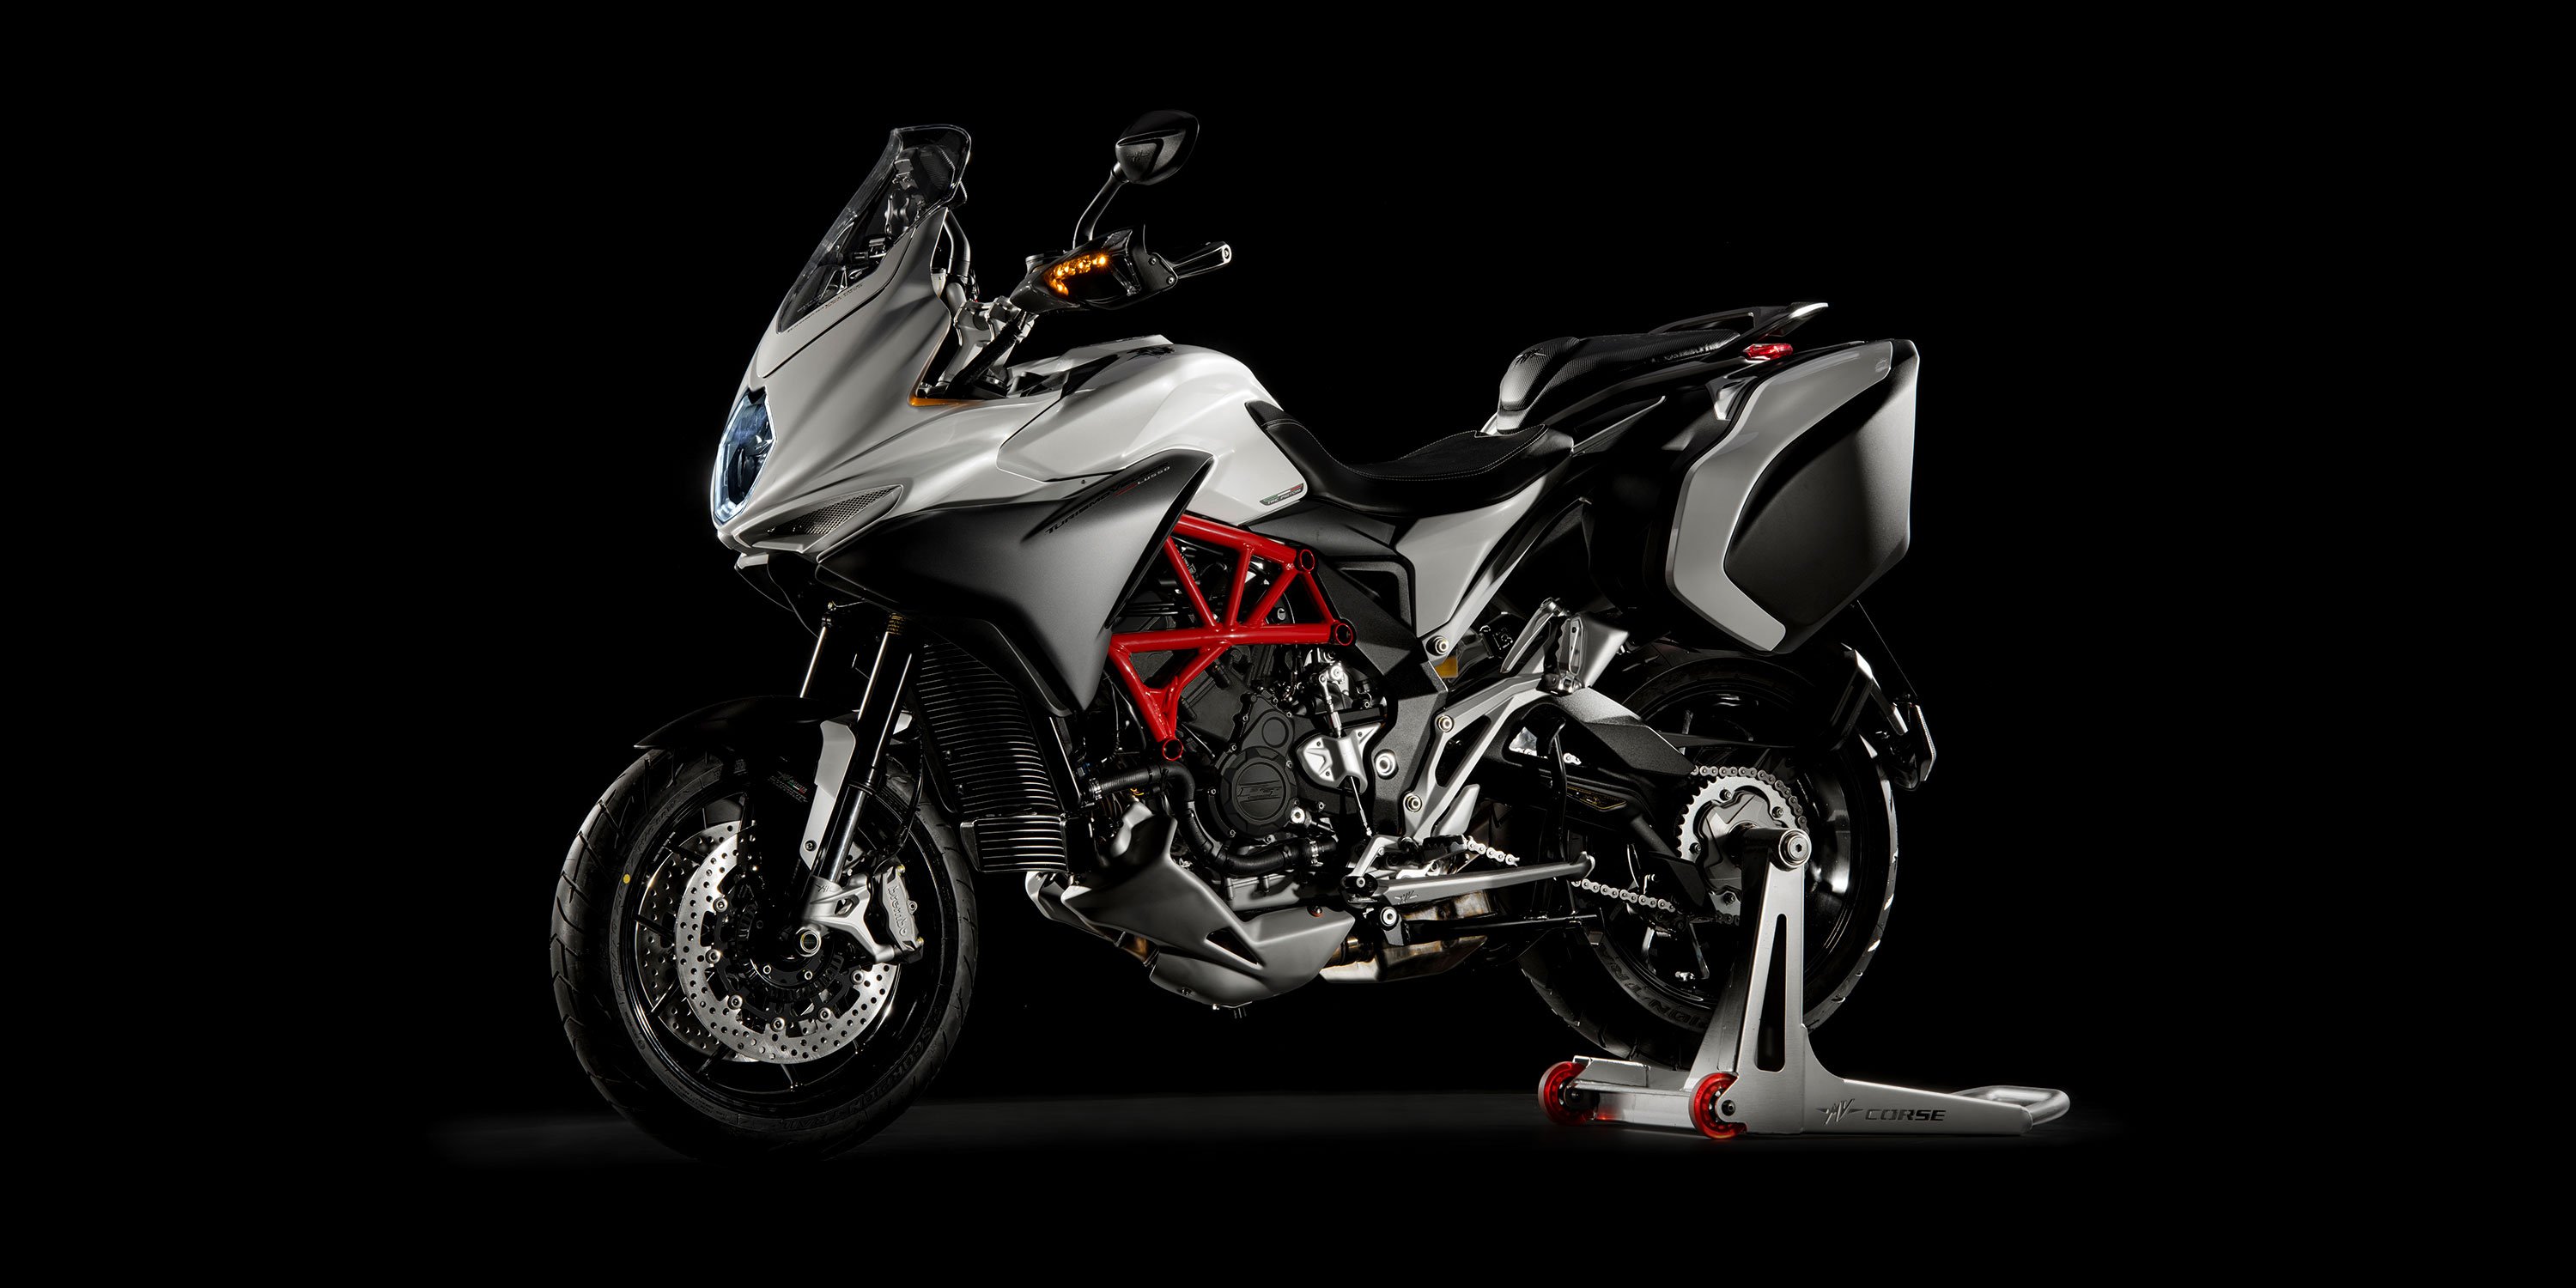 mv agusta, Turismo, Veloce, 800, Lusso, Motorcycles, 2015 Wallpaper